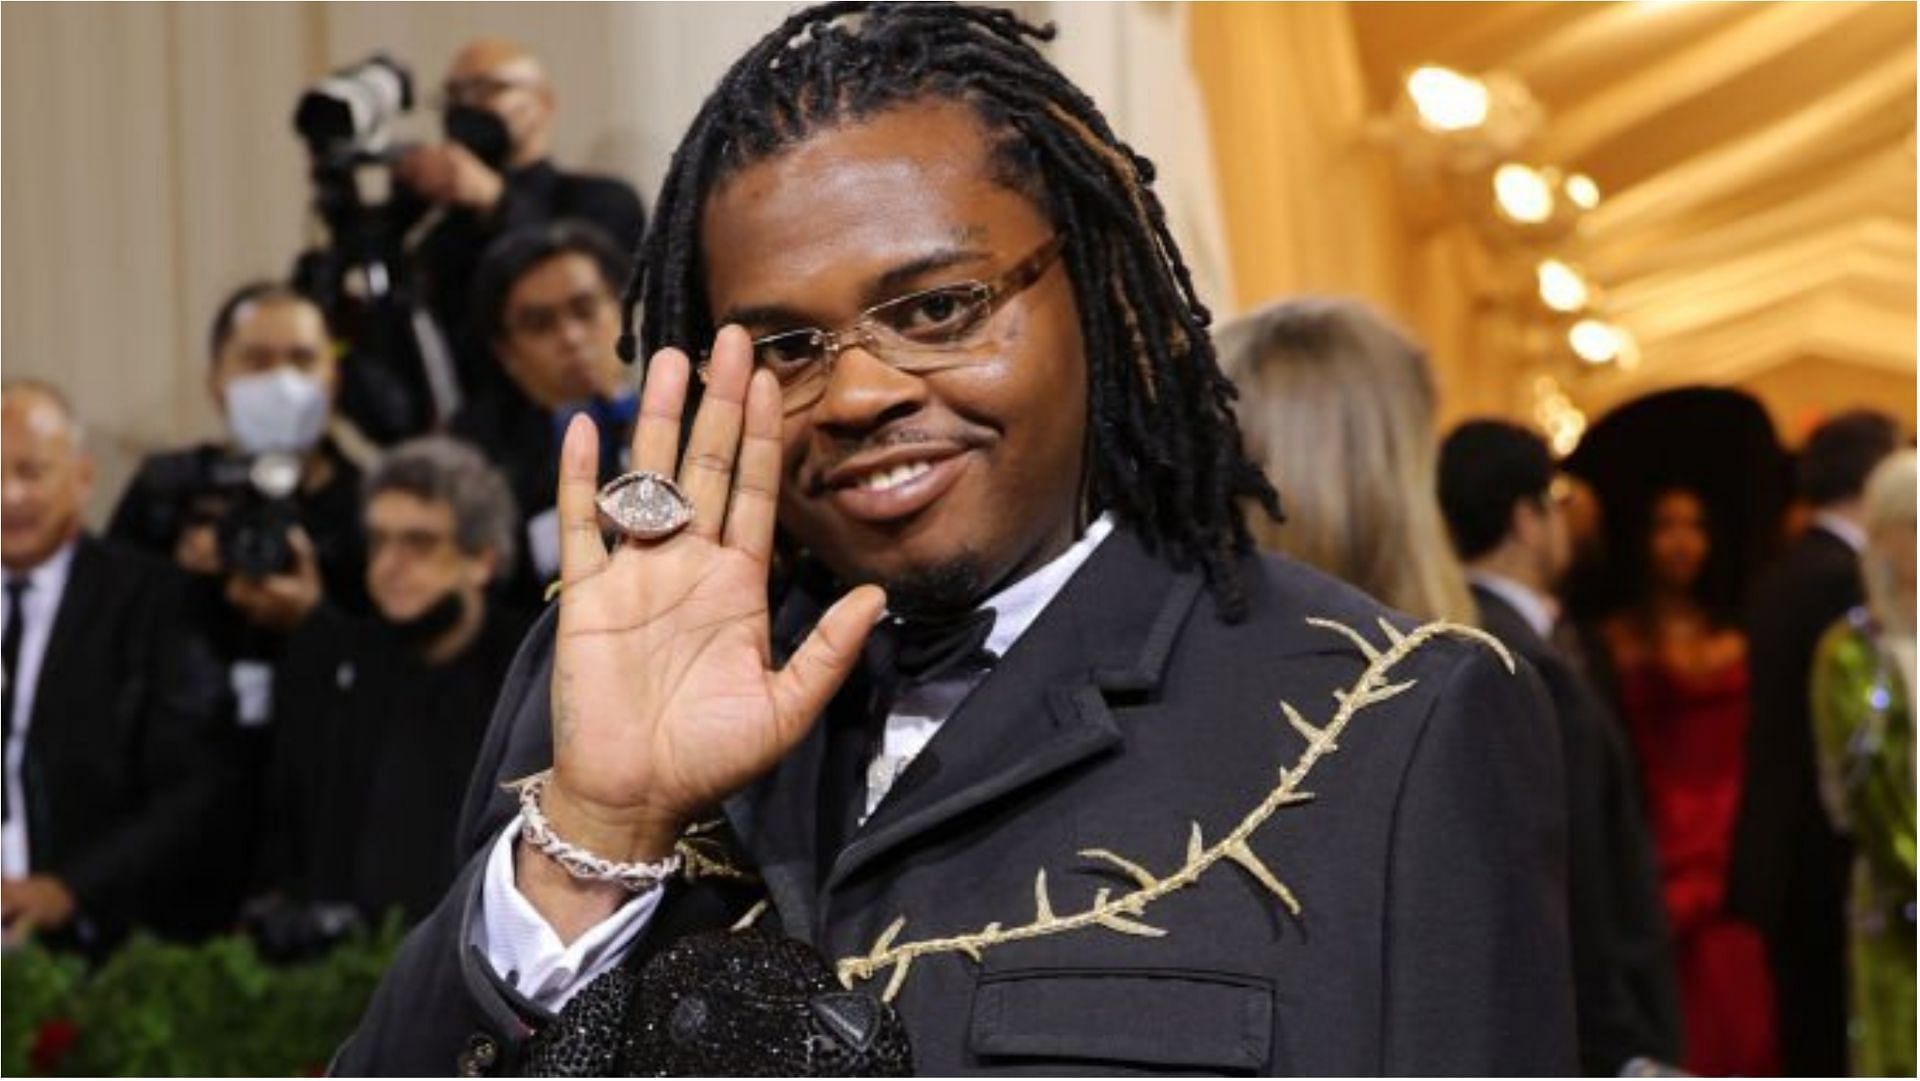 Gunna is being released from prison after making a plea deal (Image via Mike Coppola/Getty Images)